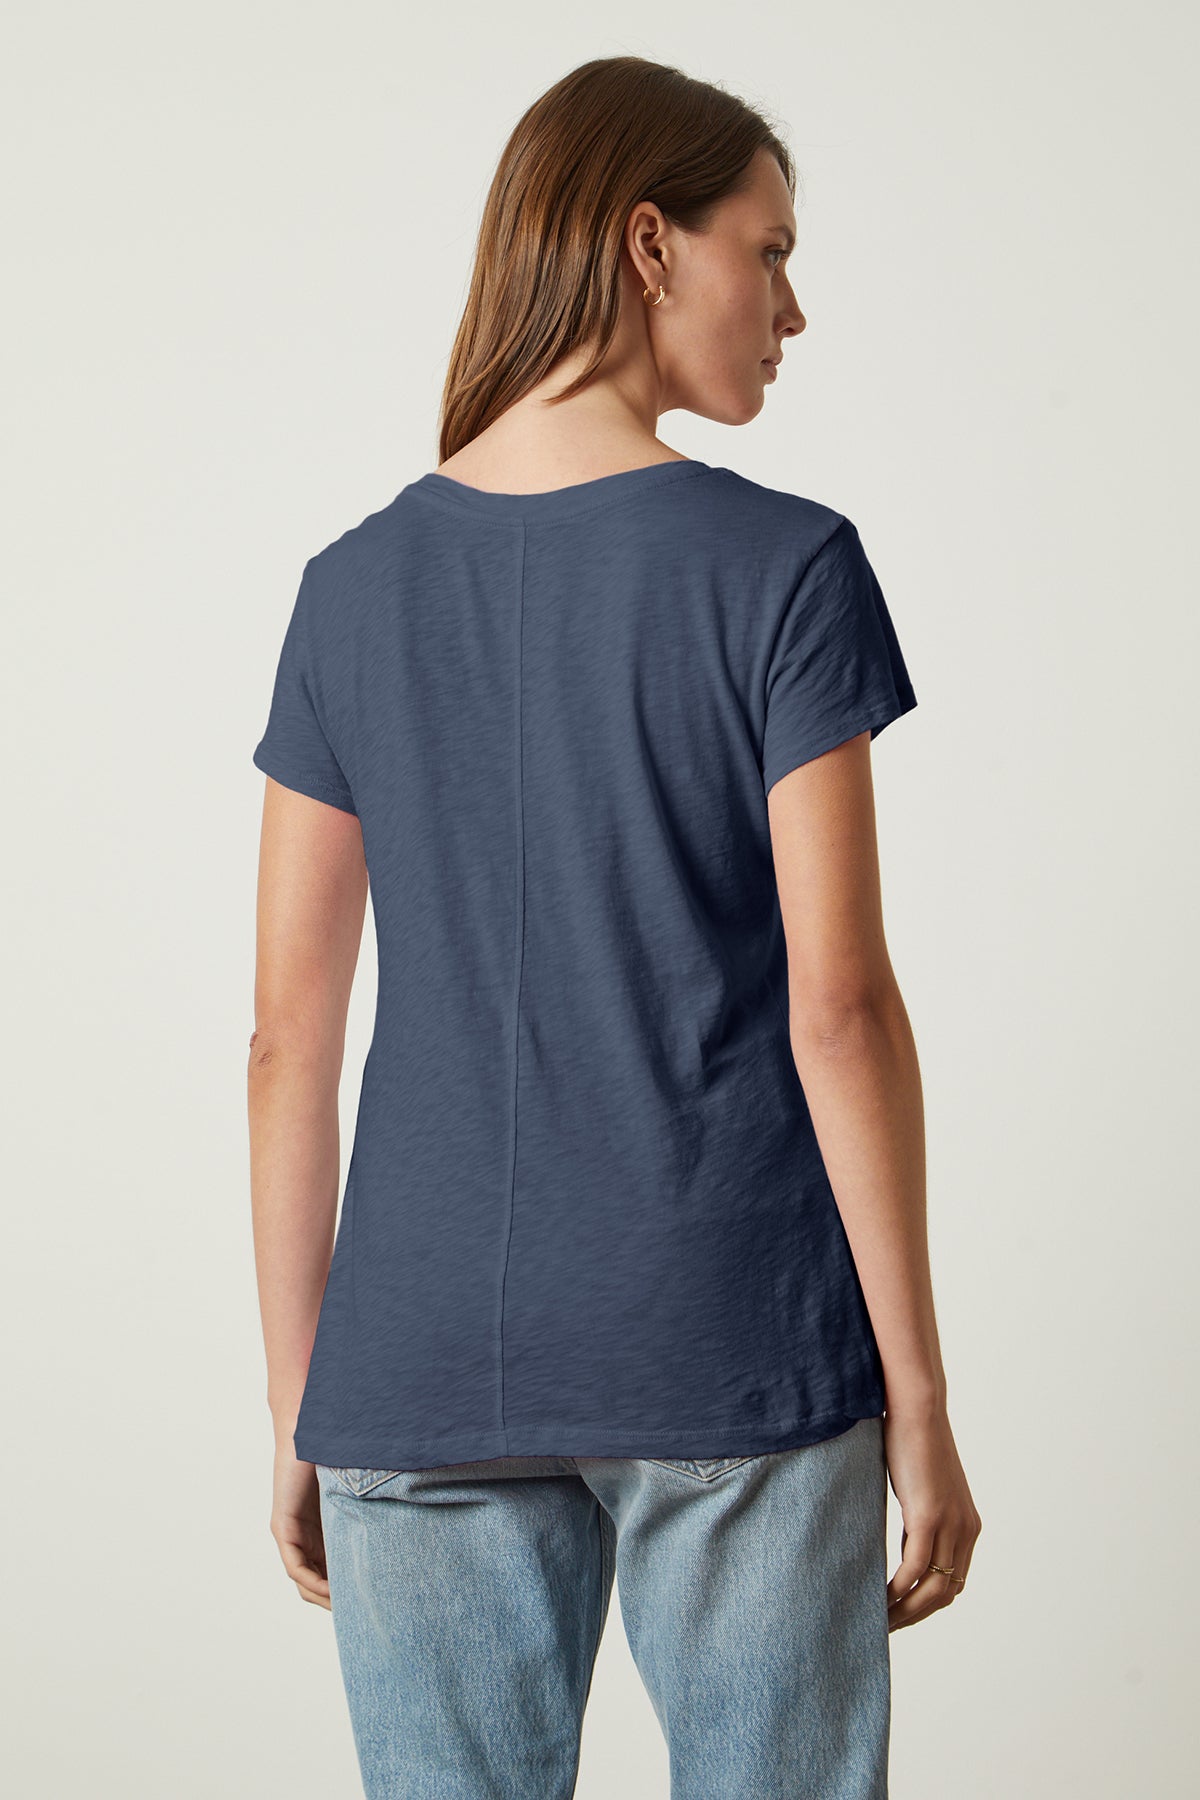 A person with long brown hair is standing and facing away from the camera, wearing a navy blue short-sleeve ODELIA TEE by Velvet by Graham & Spencer with a classic crew neckline and light blue jeans. This wardrobe essential showcases premium cotton for ultimate comfort.-37250155479233